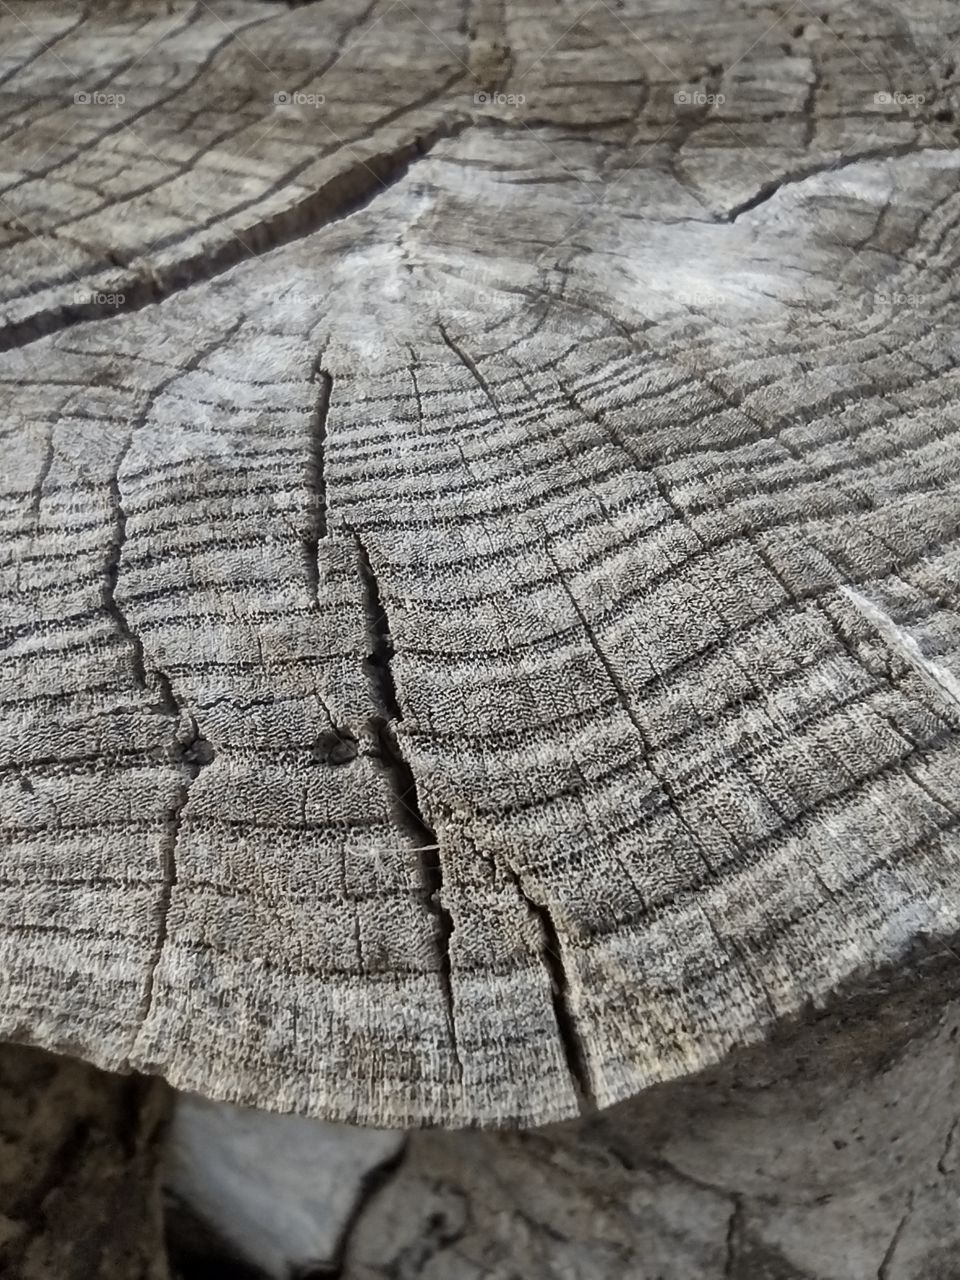 Unfiltered, beautiful, lovely close-up of a tree stump in autumn